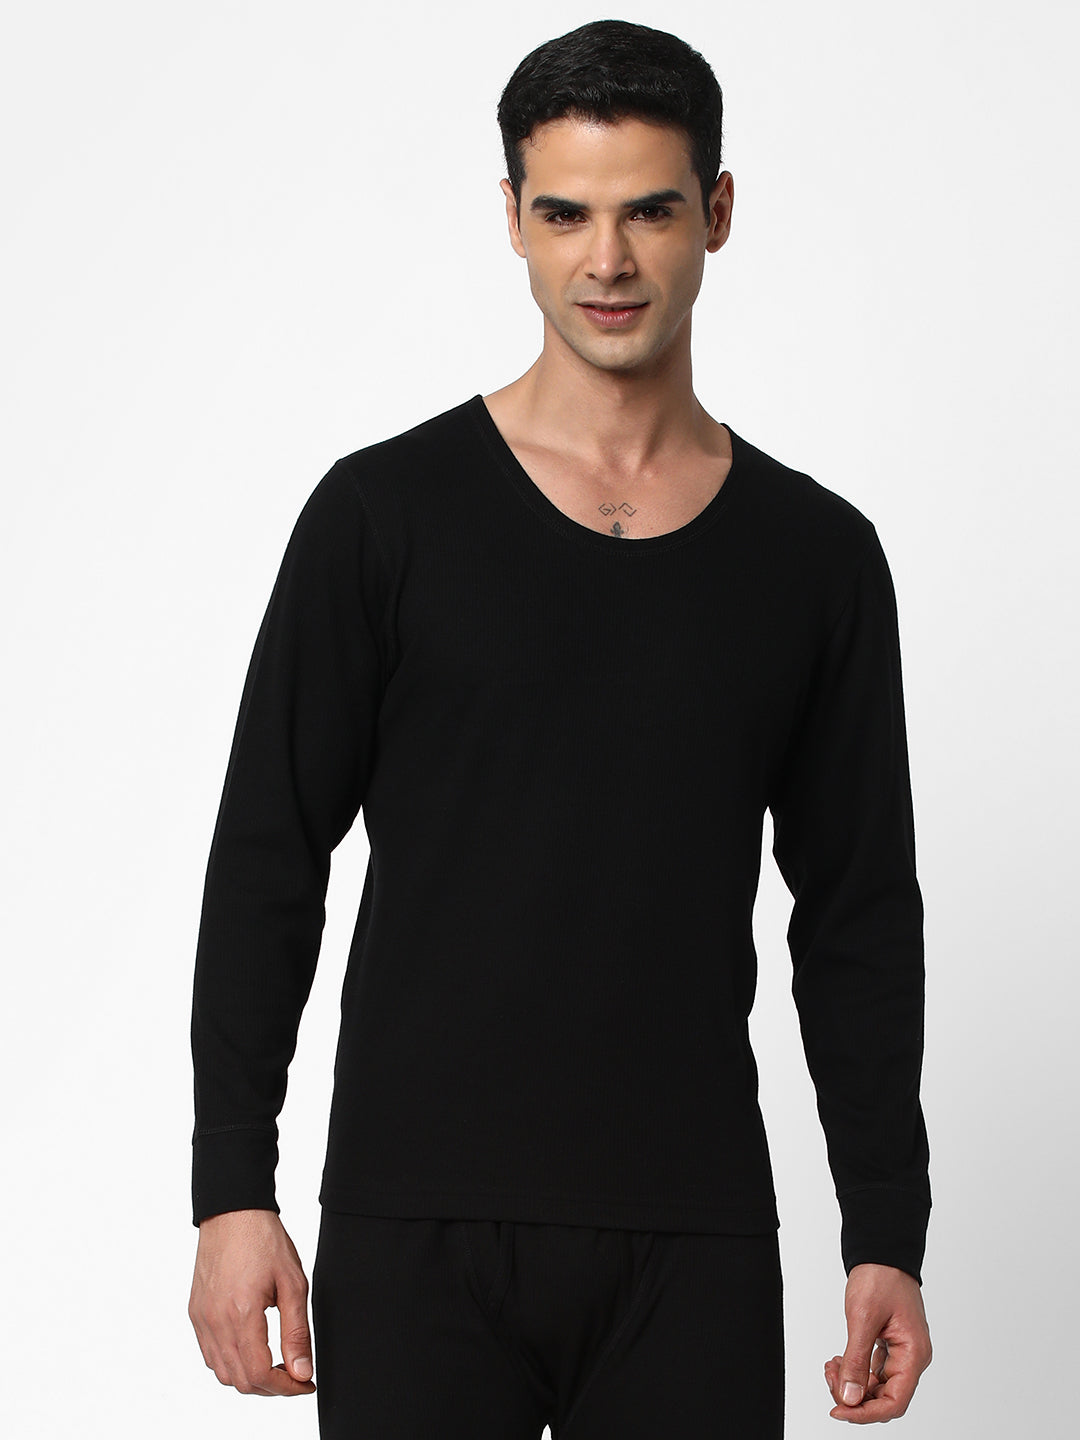 Cotstyle Men's Super Combed Cotton Fabric Top Innerwear Thermals, Black-Pack of 1, Style no.TH2100